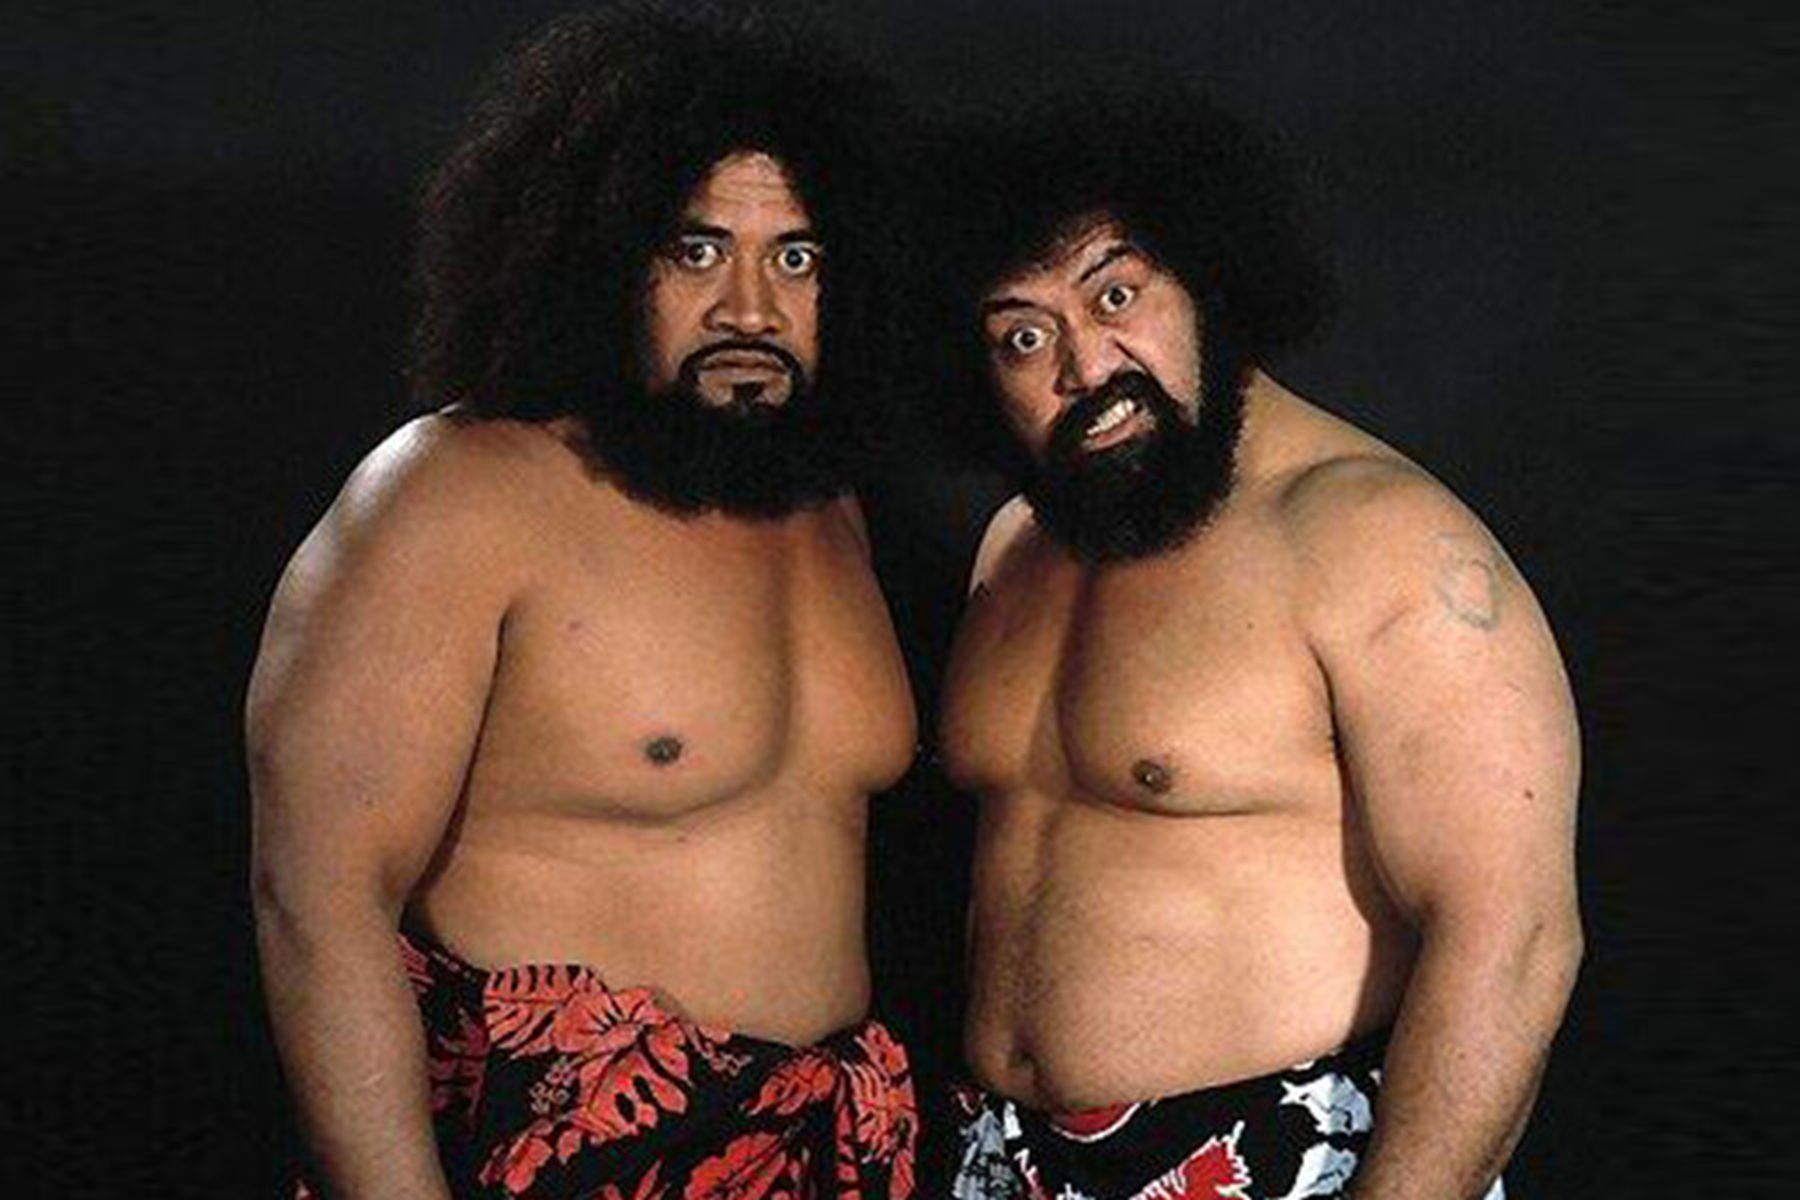 Sika was one half of The Wild Samoans